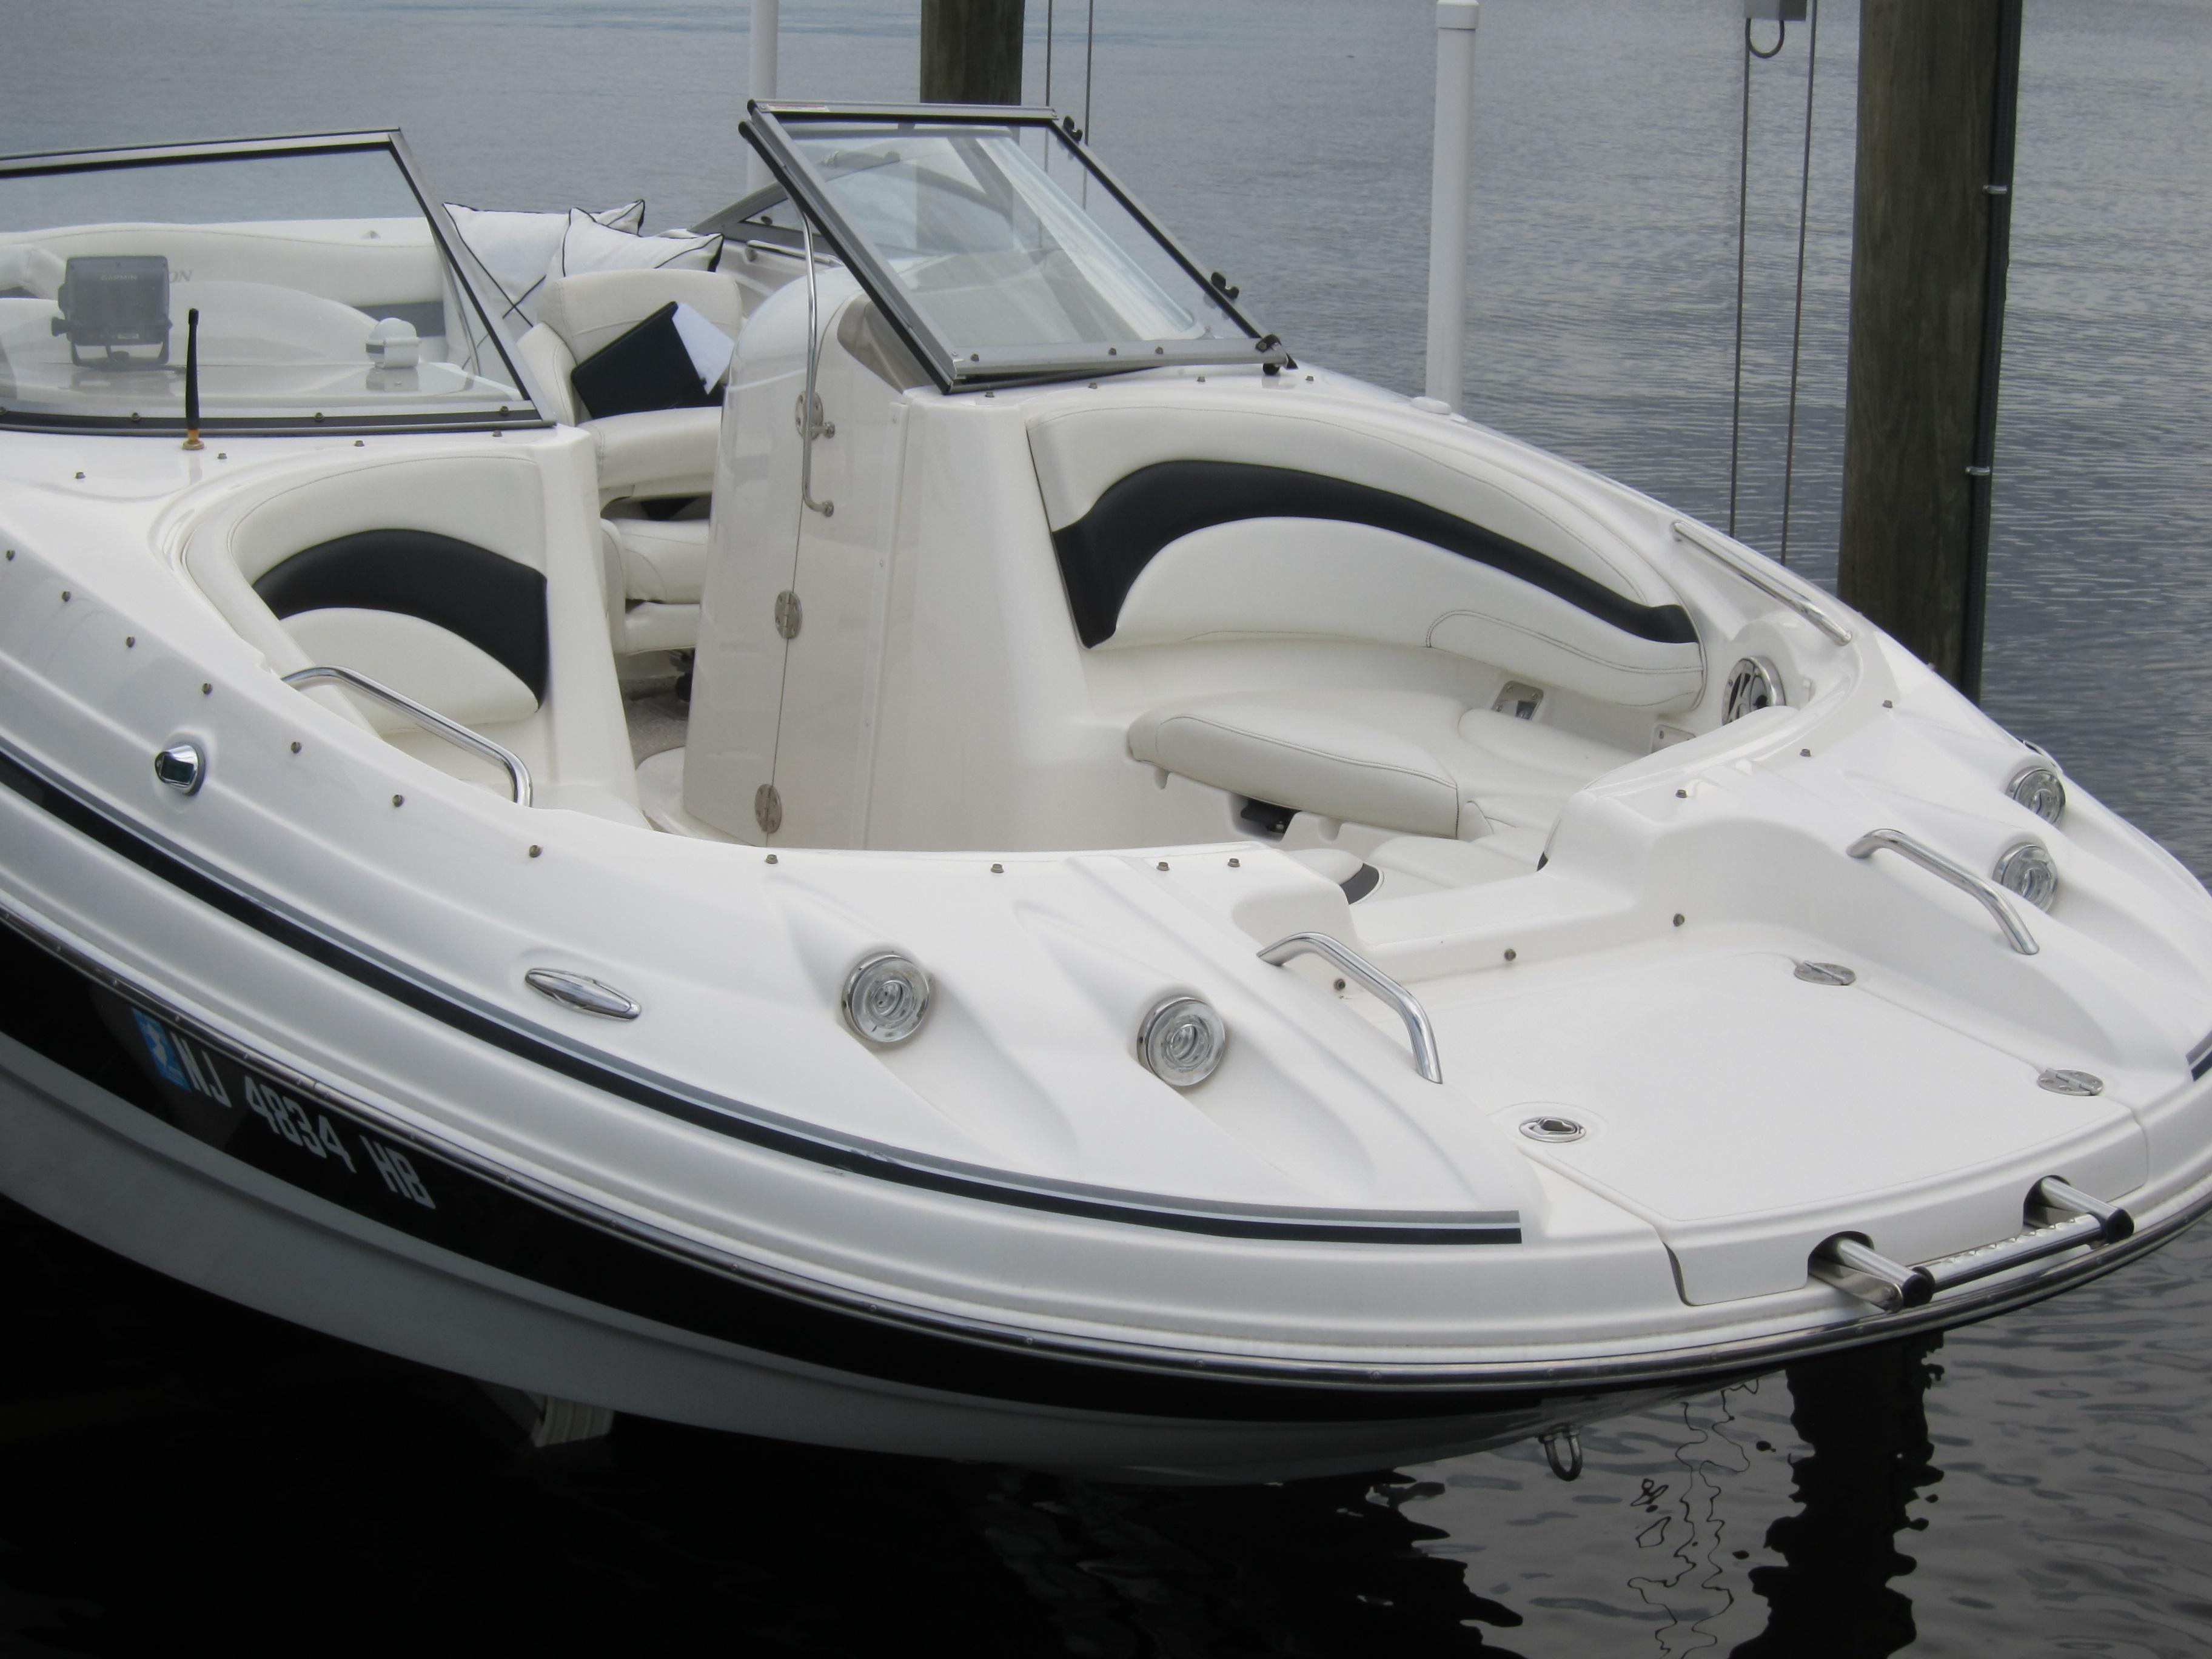 Larson 234 Escape Deck Boat, FORKED RIVER-ON SITE